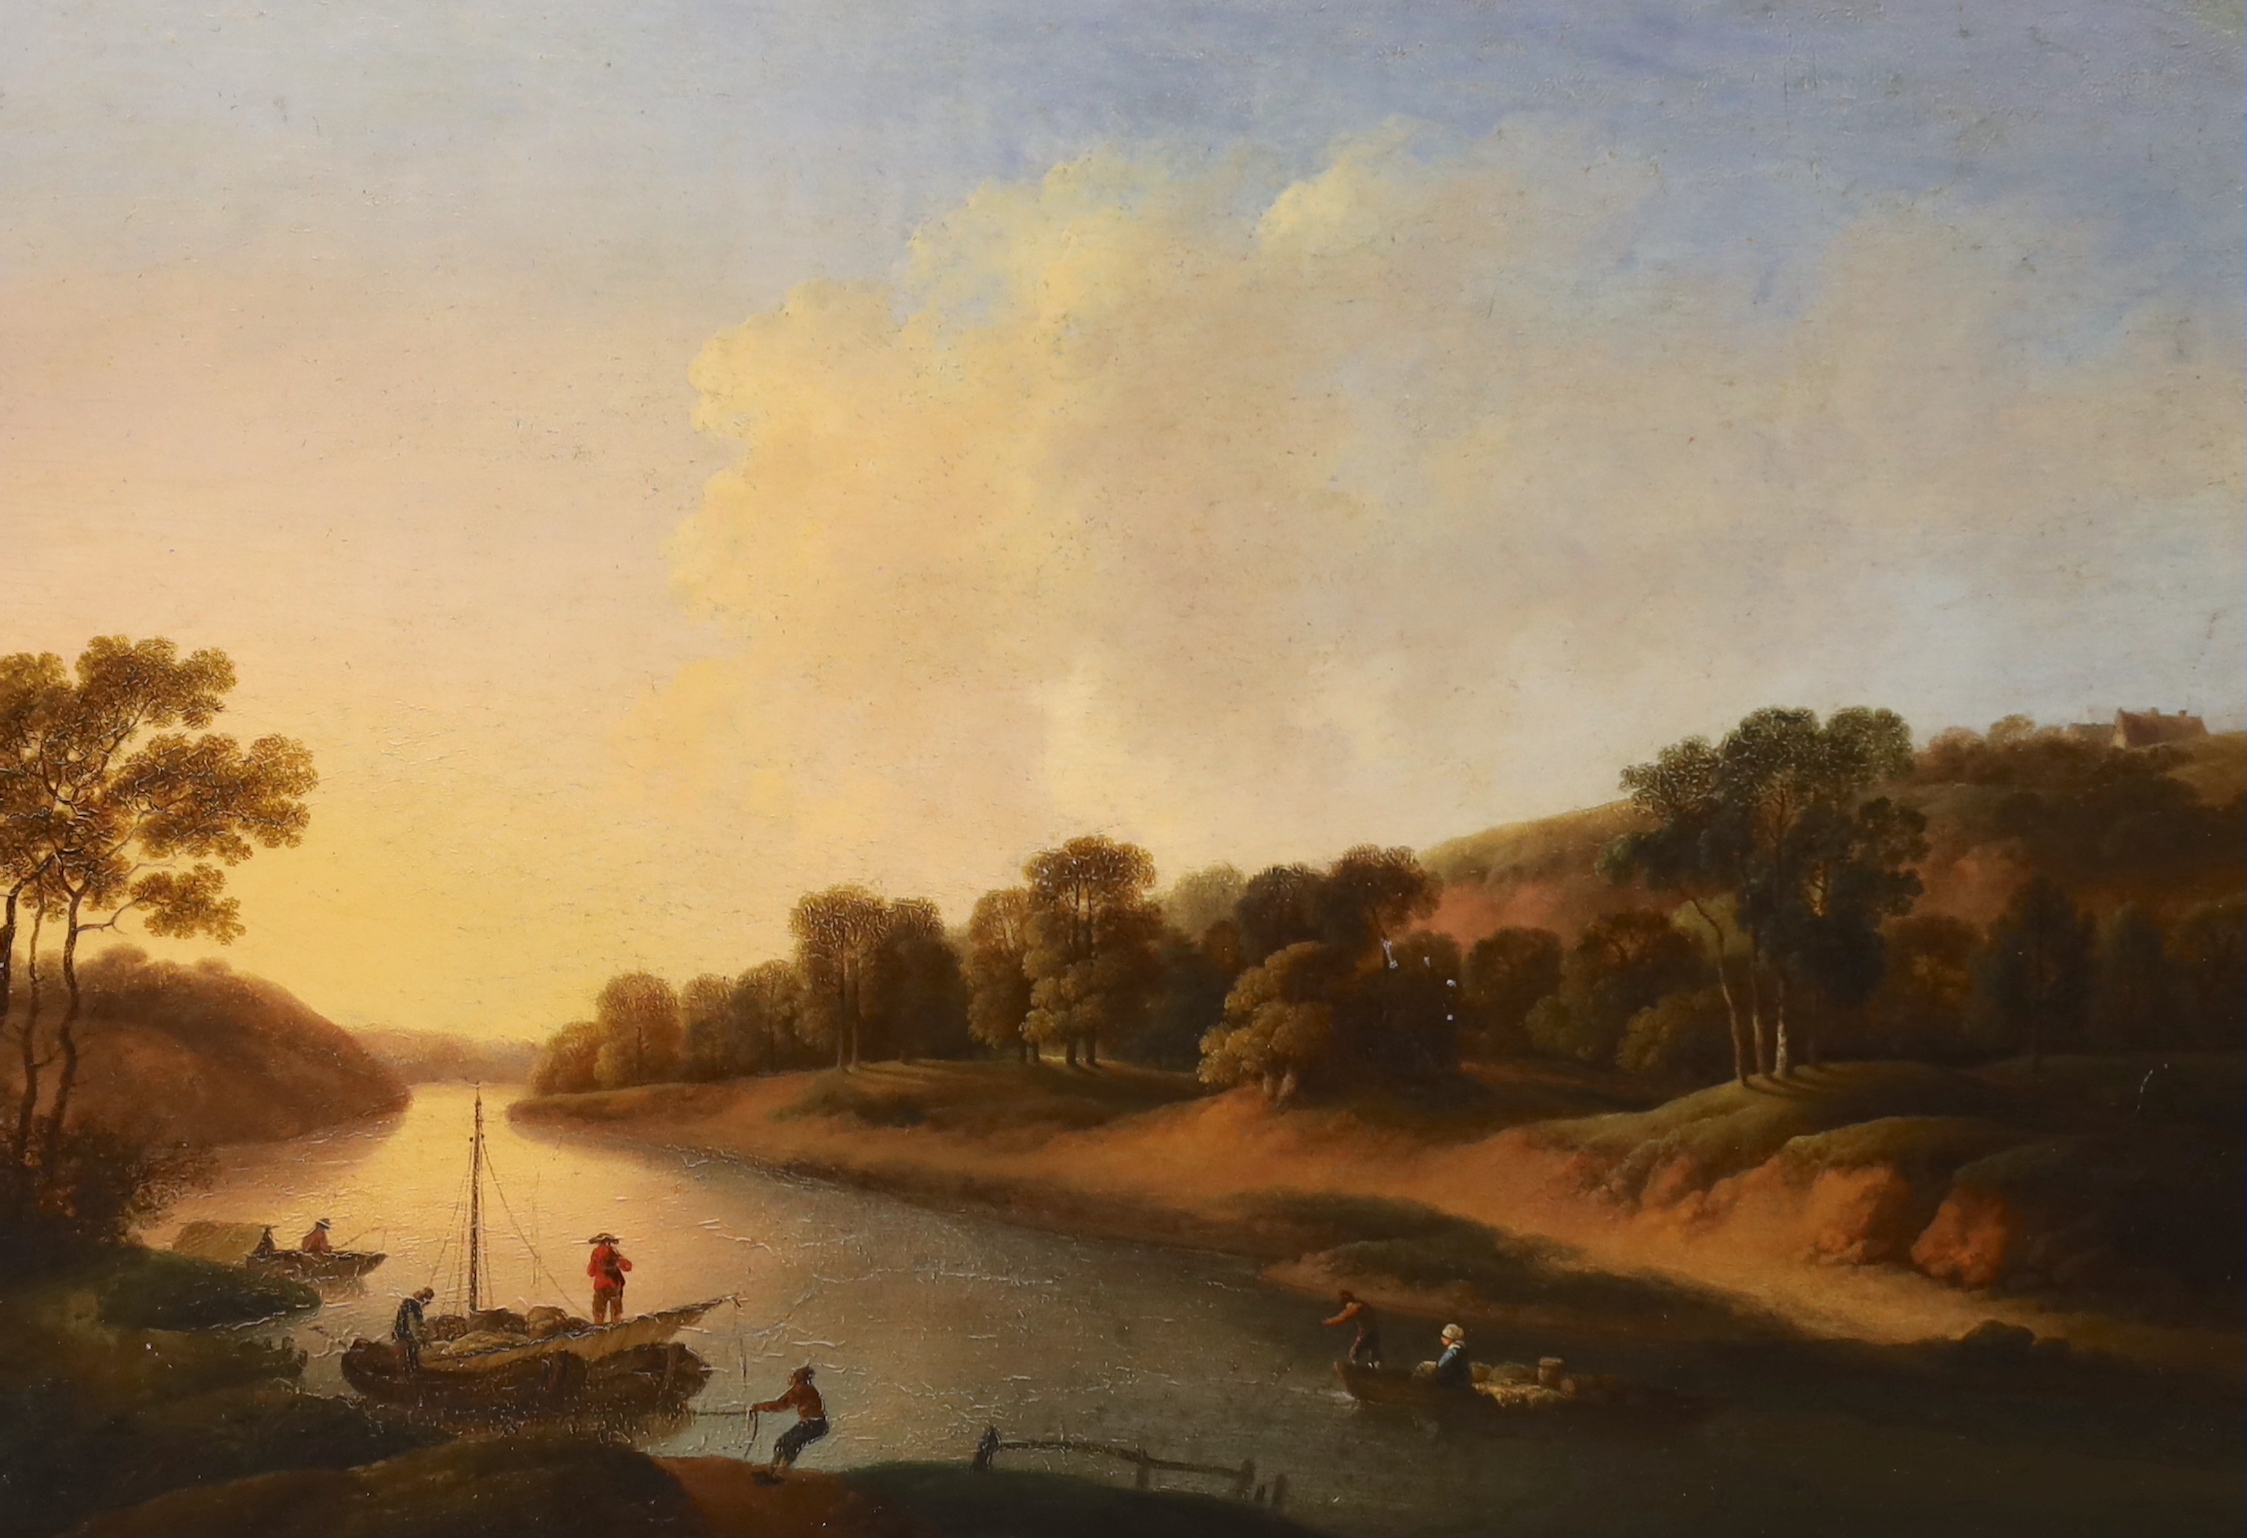 19th century English School, oil on panel, River landscape with figures and boats, 33 x 23cm